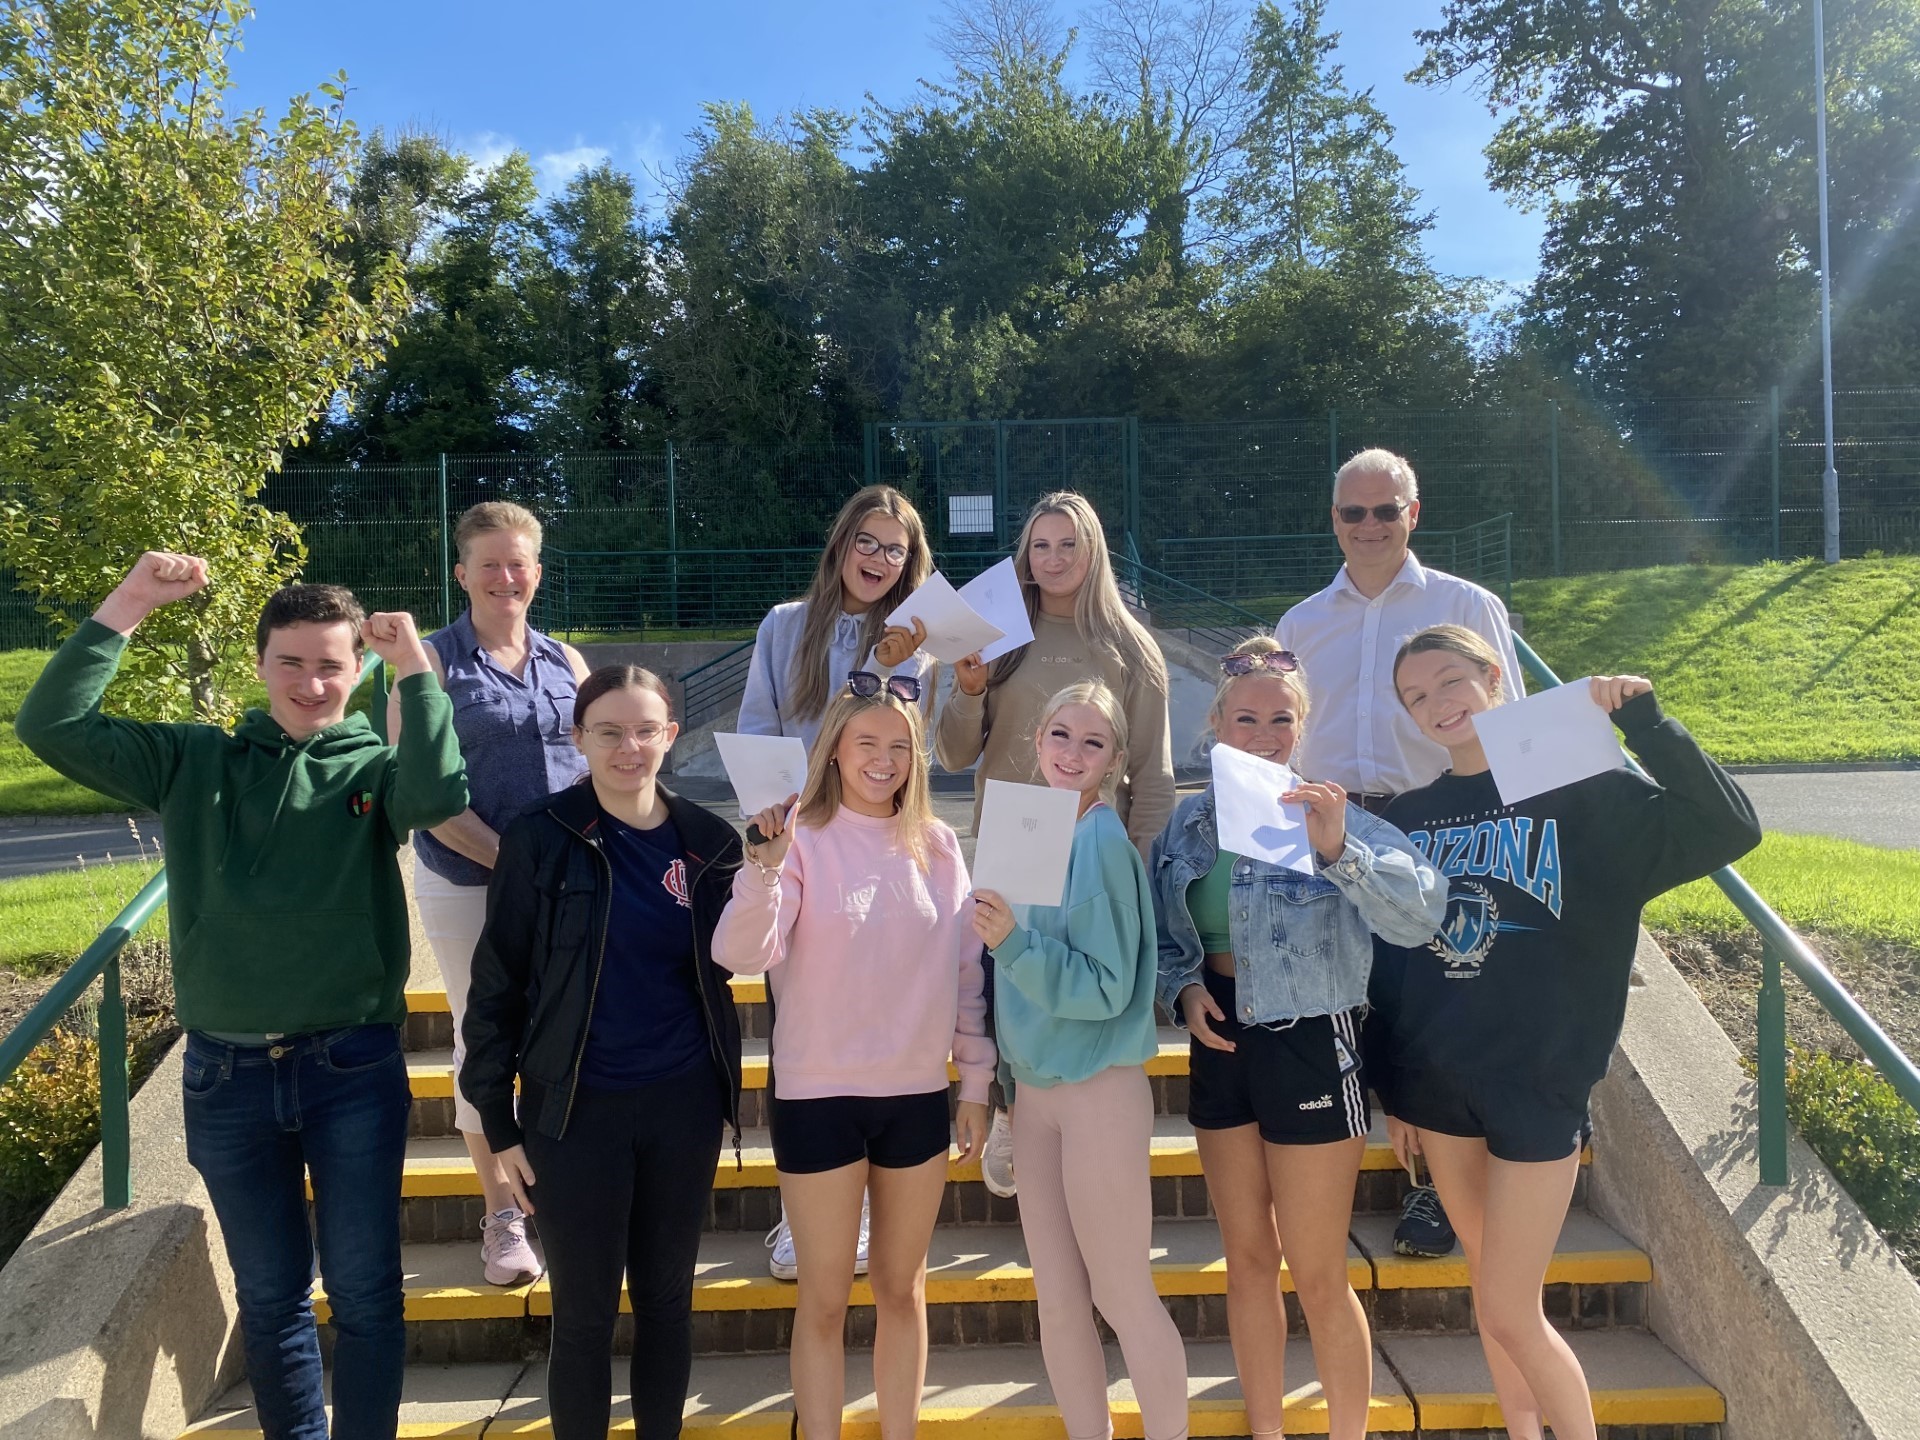 Erne Integrated College A-Level students receive their results. Pictured front row, from left: Stuart Bothwell, Abigail Farrelly, Amy Ellis, Elise Breen, Hope Milligan and Ava Lorentzen. Back row, from left: Vice Principal Sharon McKee, Samantha